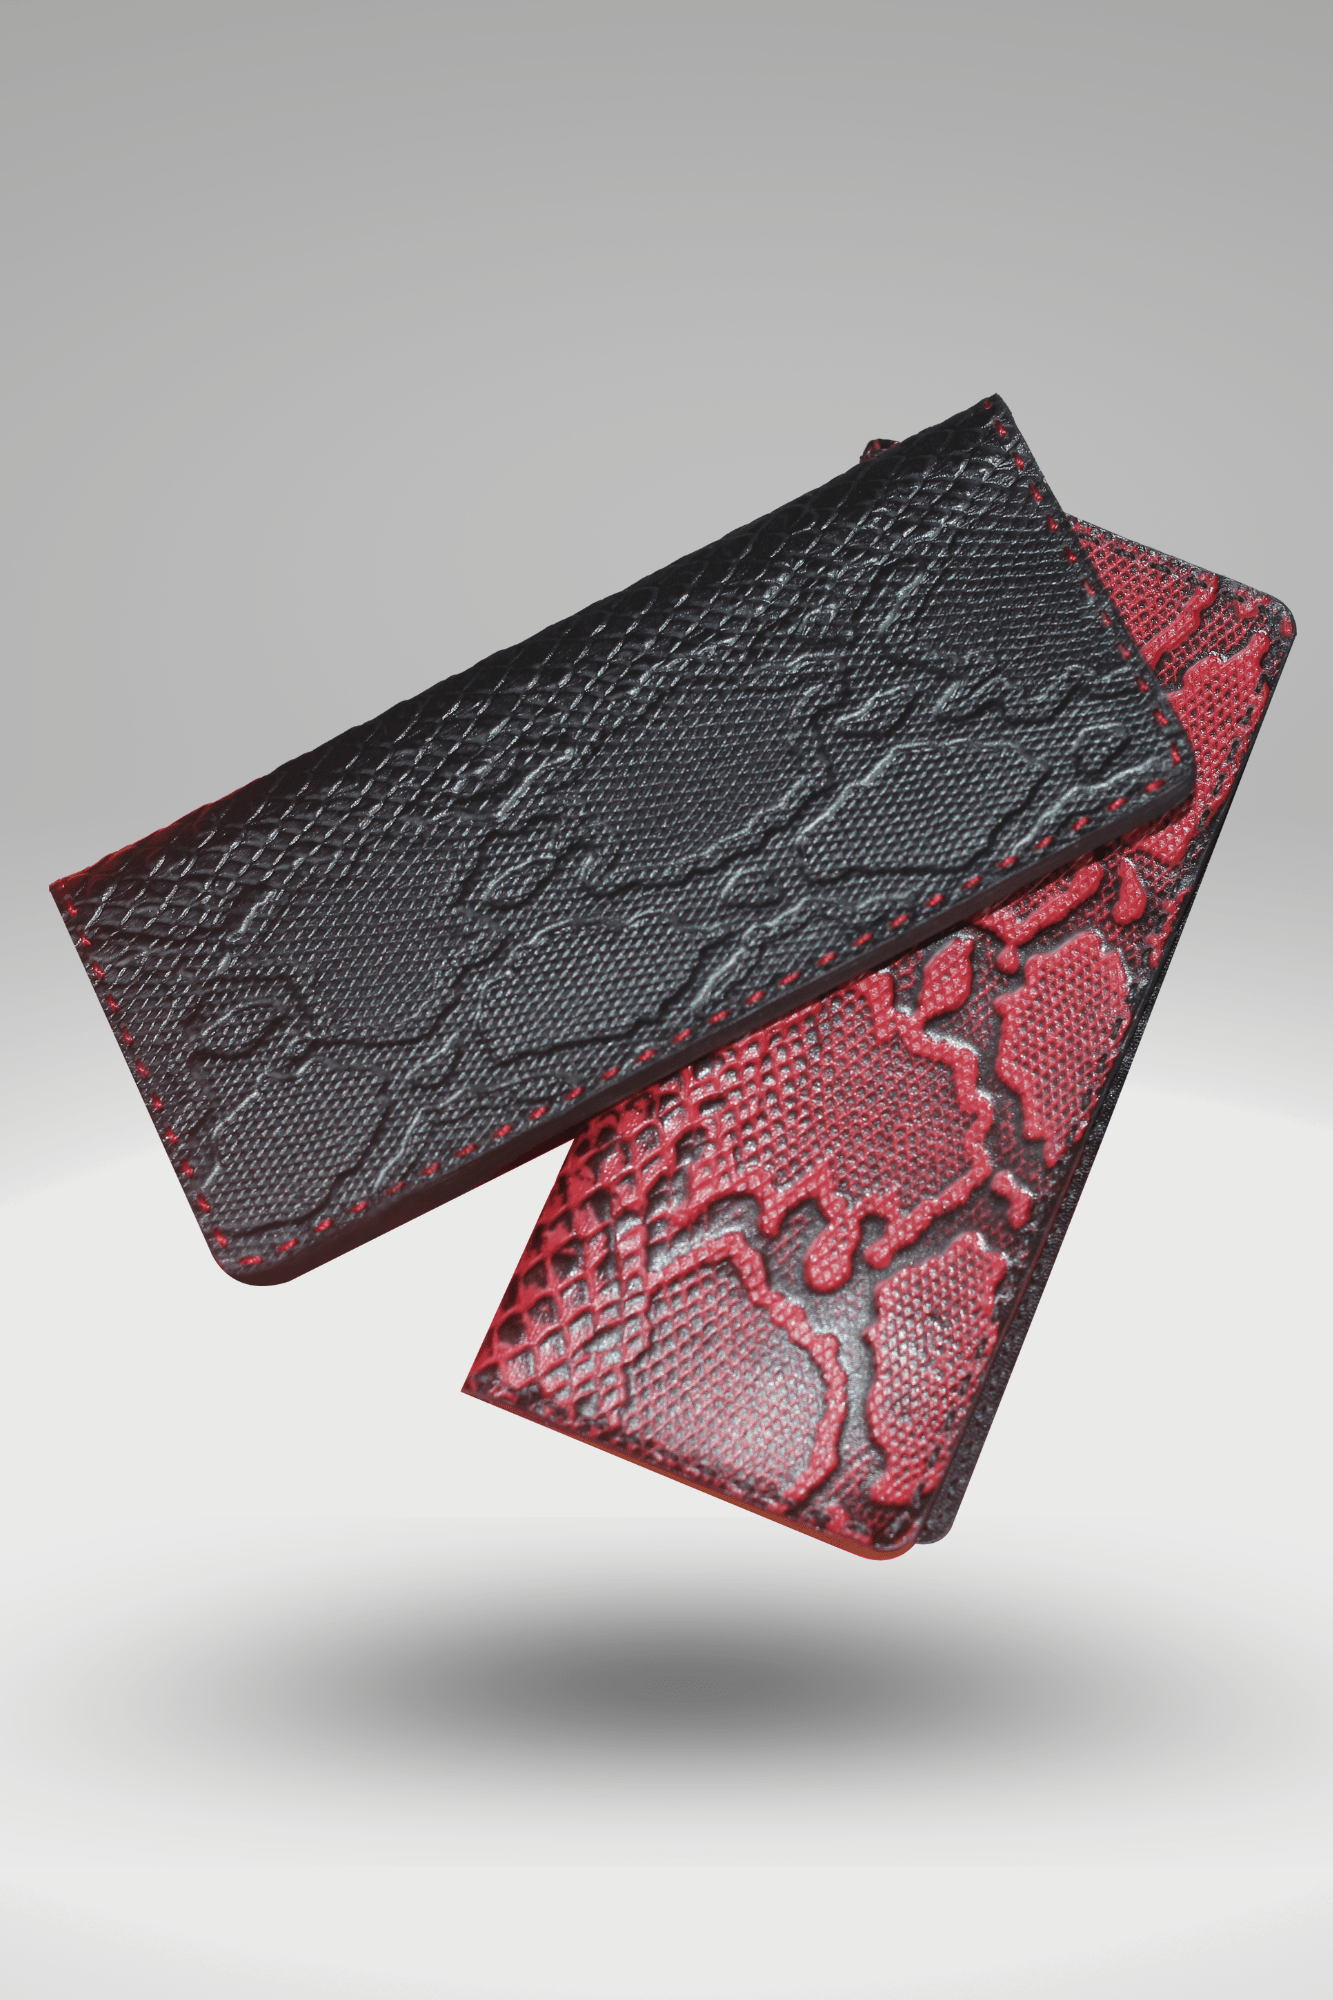 Unisex Genuine Leather Wallet With Black Hand-Tipped Maroon & Black Python Textured Finish